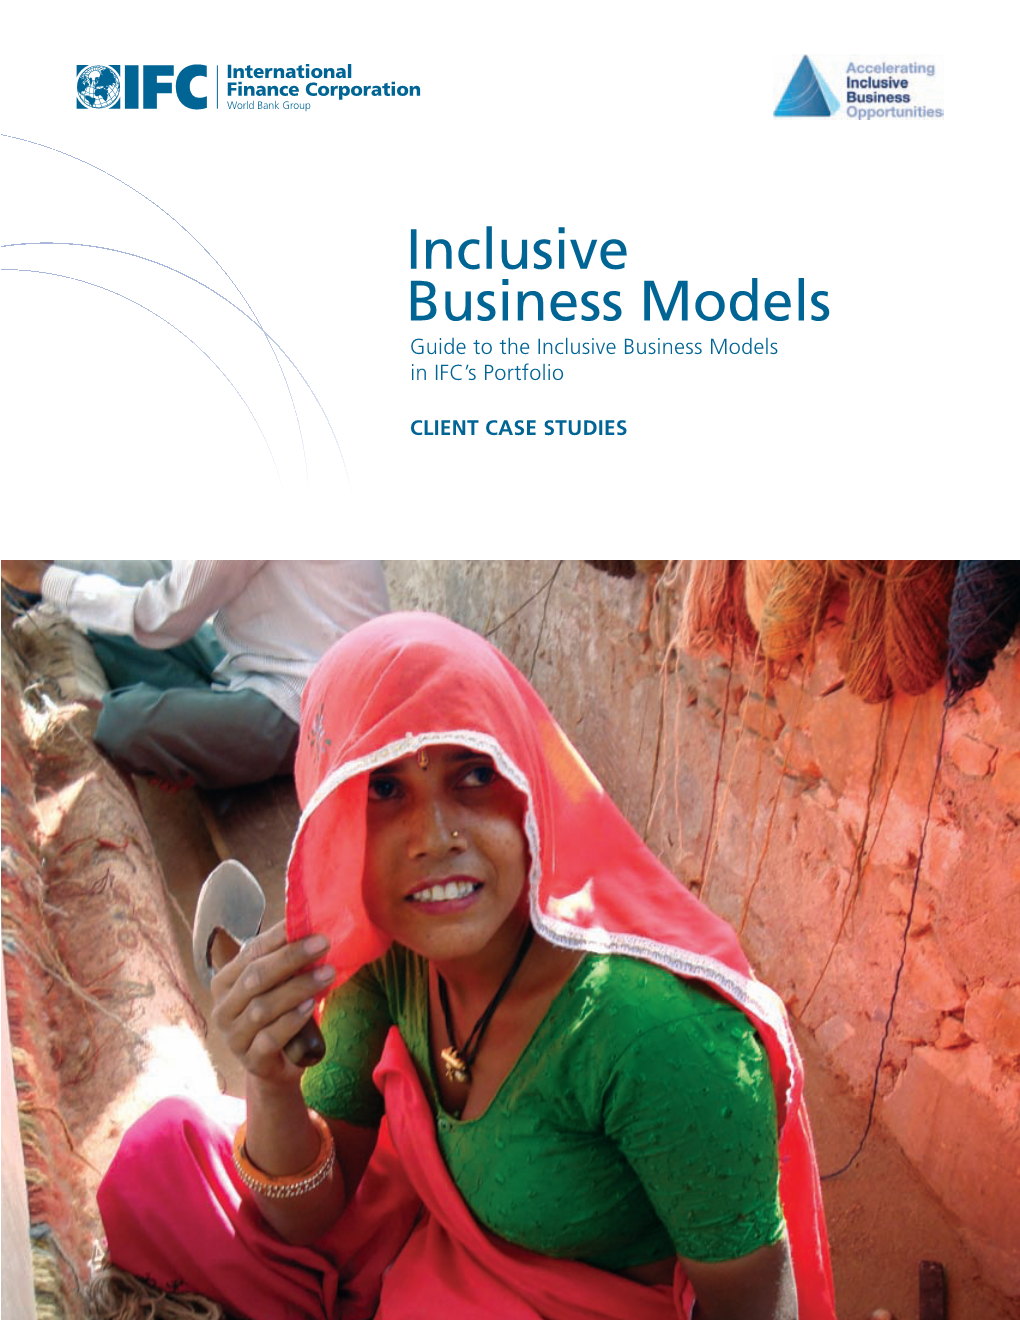 Inclusive Business Models Guide to the Inclusive Business Models in IFC’S Portfolio